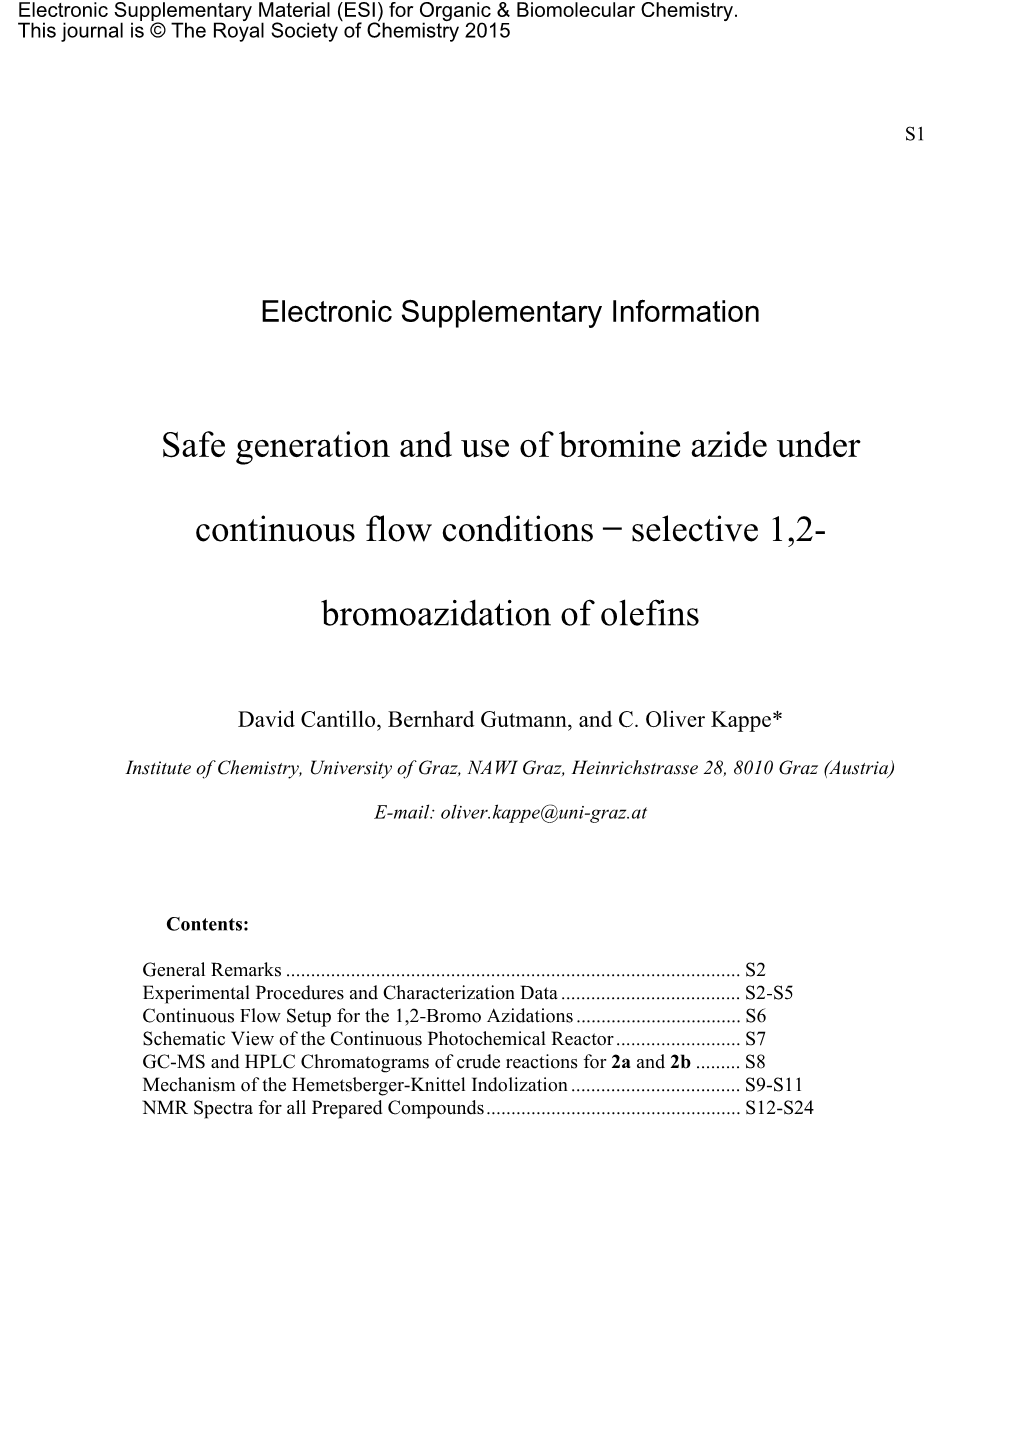 Safe Generation and Use of Bromine Azide Under Continuous Flow